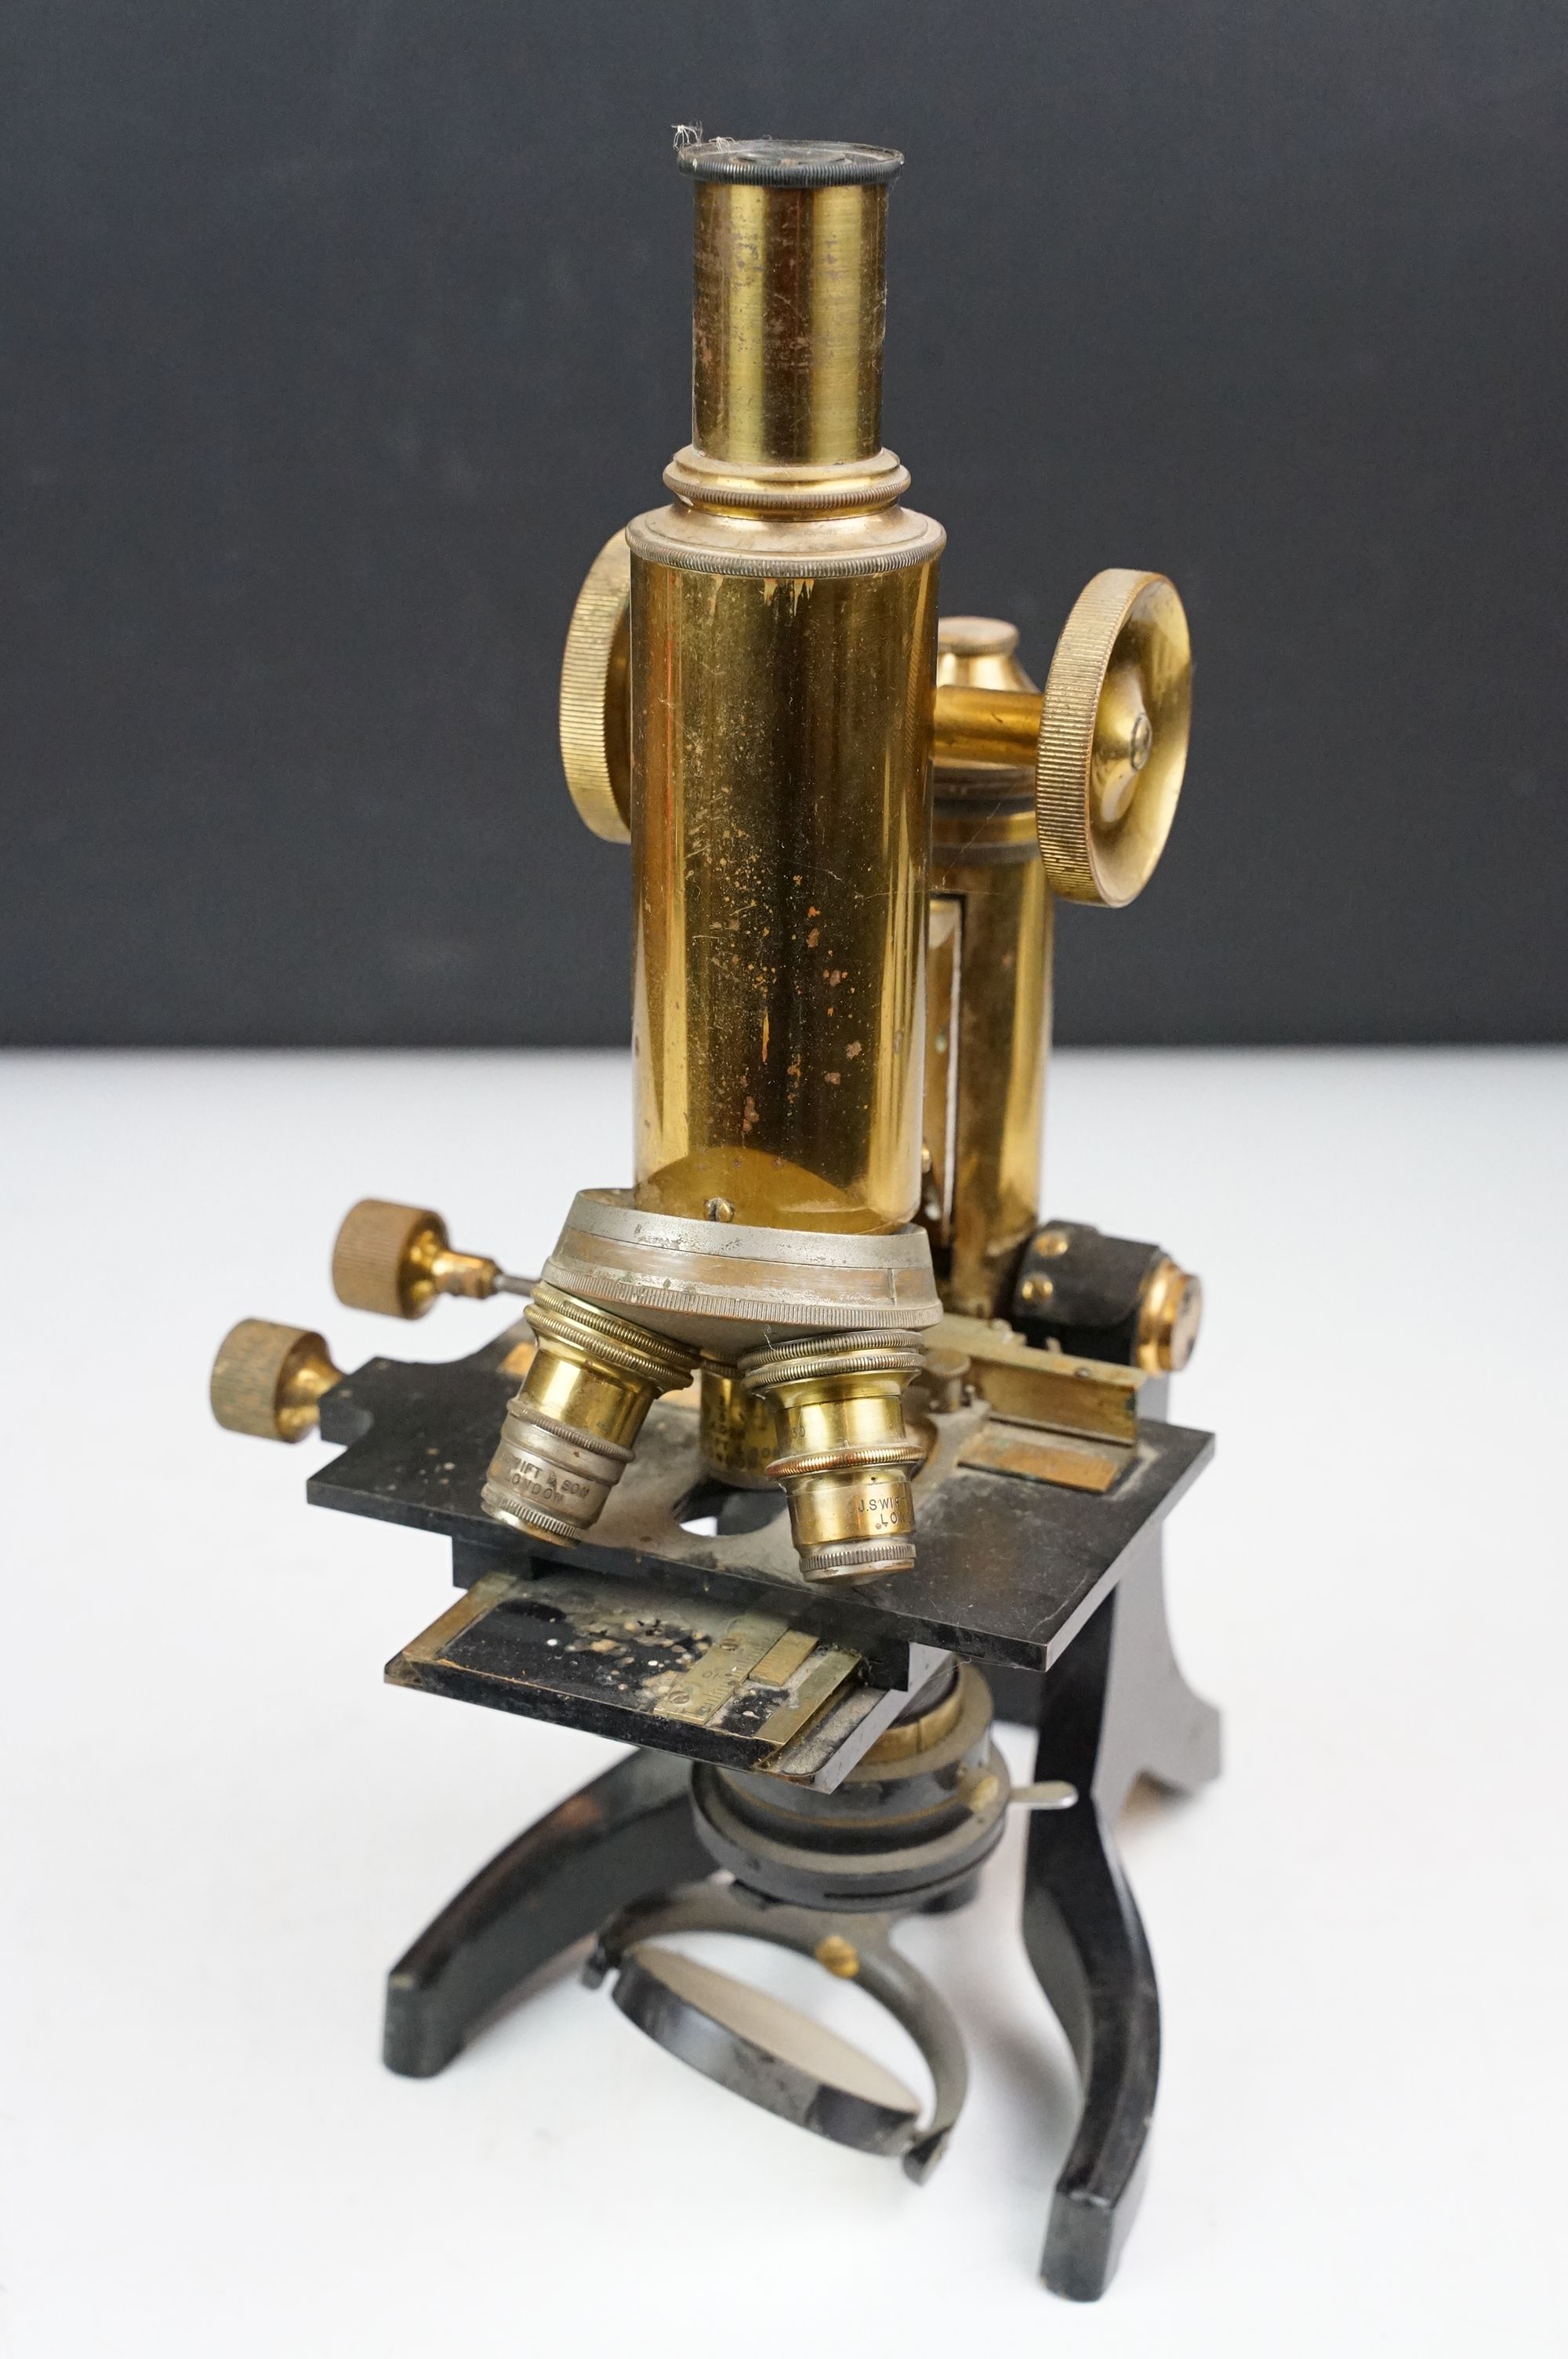 J. Swift & Son of London brass lacquered microscope, housed within a wooden carry case (missing - Image 8 of 11